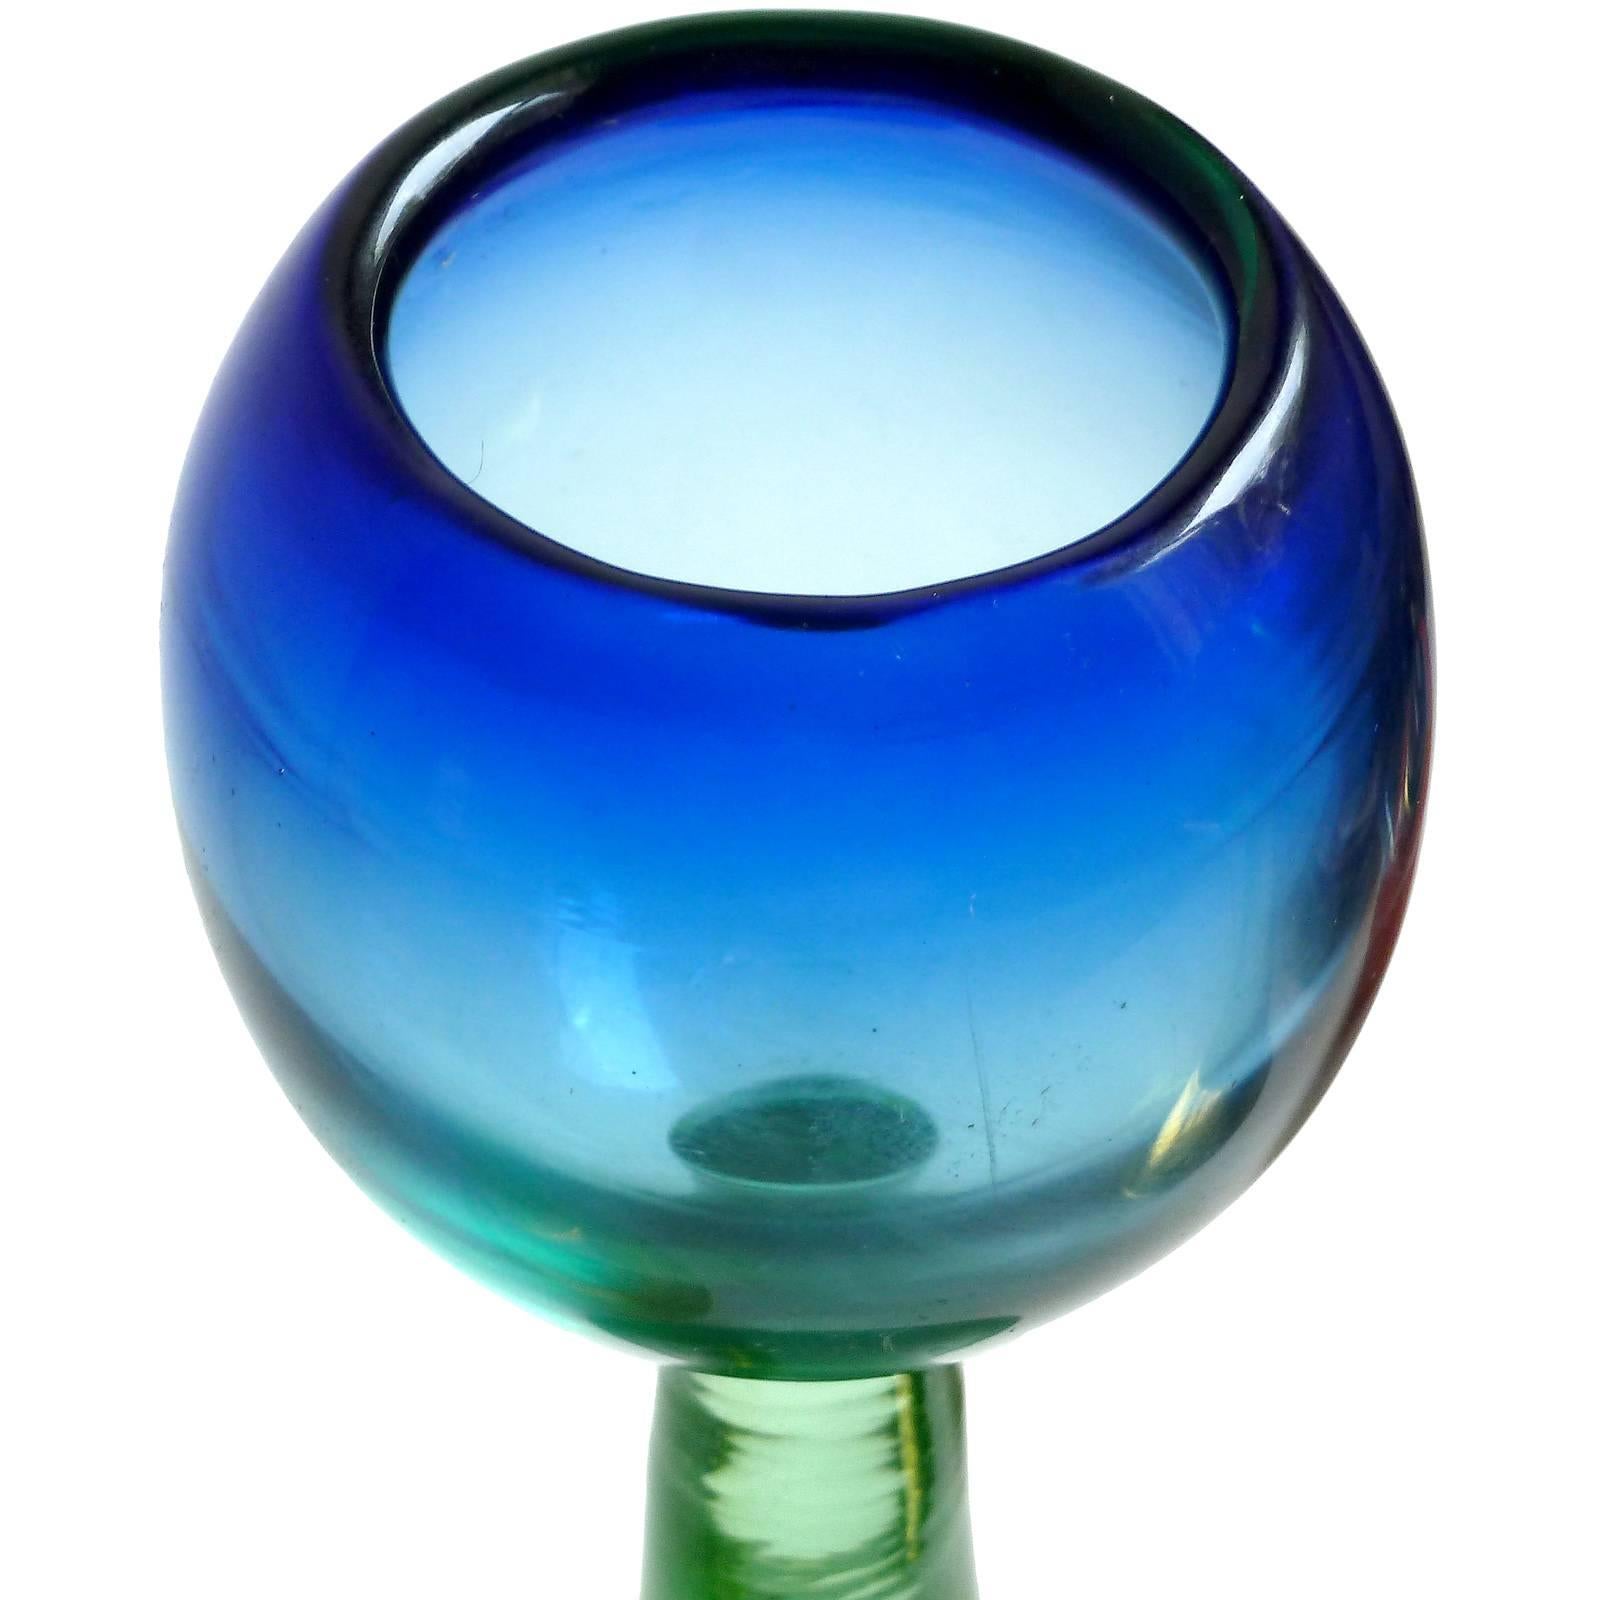 FREE Shipping Worldwide! See details below description.

Amazing Murano Handblown Sommerso Rainbow Colors Art Glass Candlesticks. Documented to the Salviati company, circa 1950-1960. The first piece with orange top is very unusual, made in